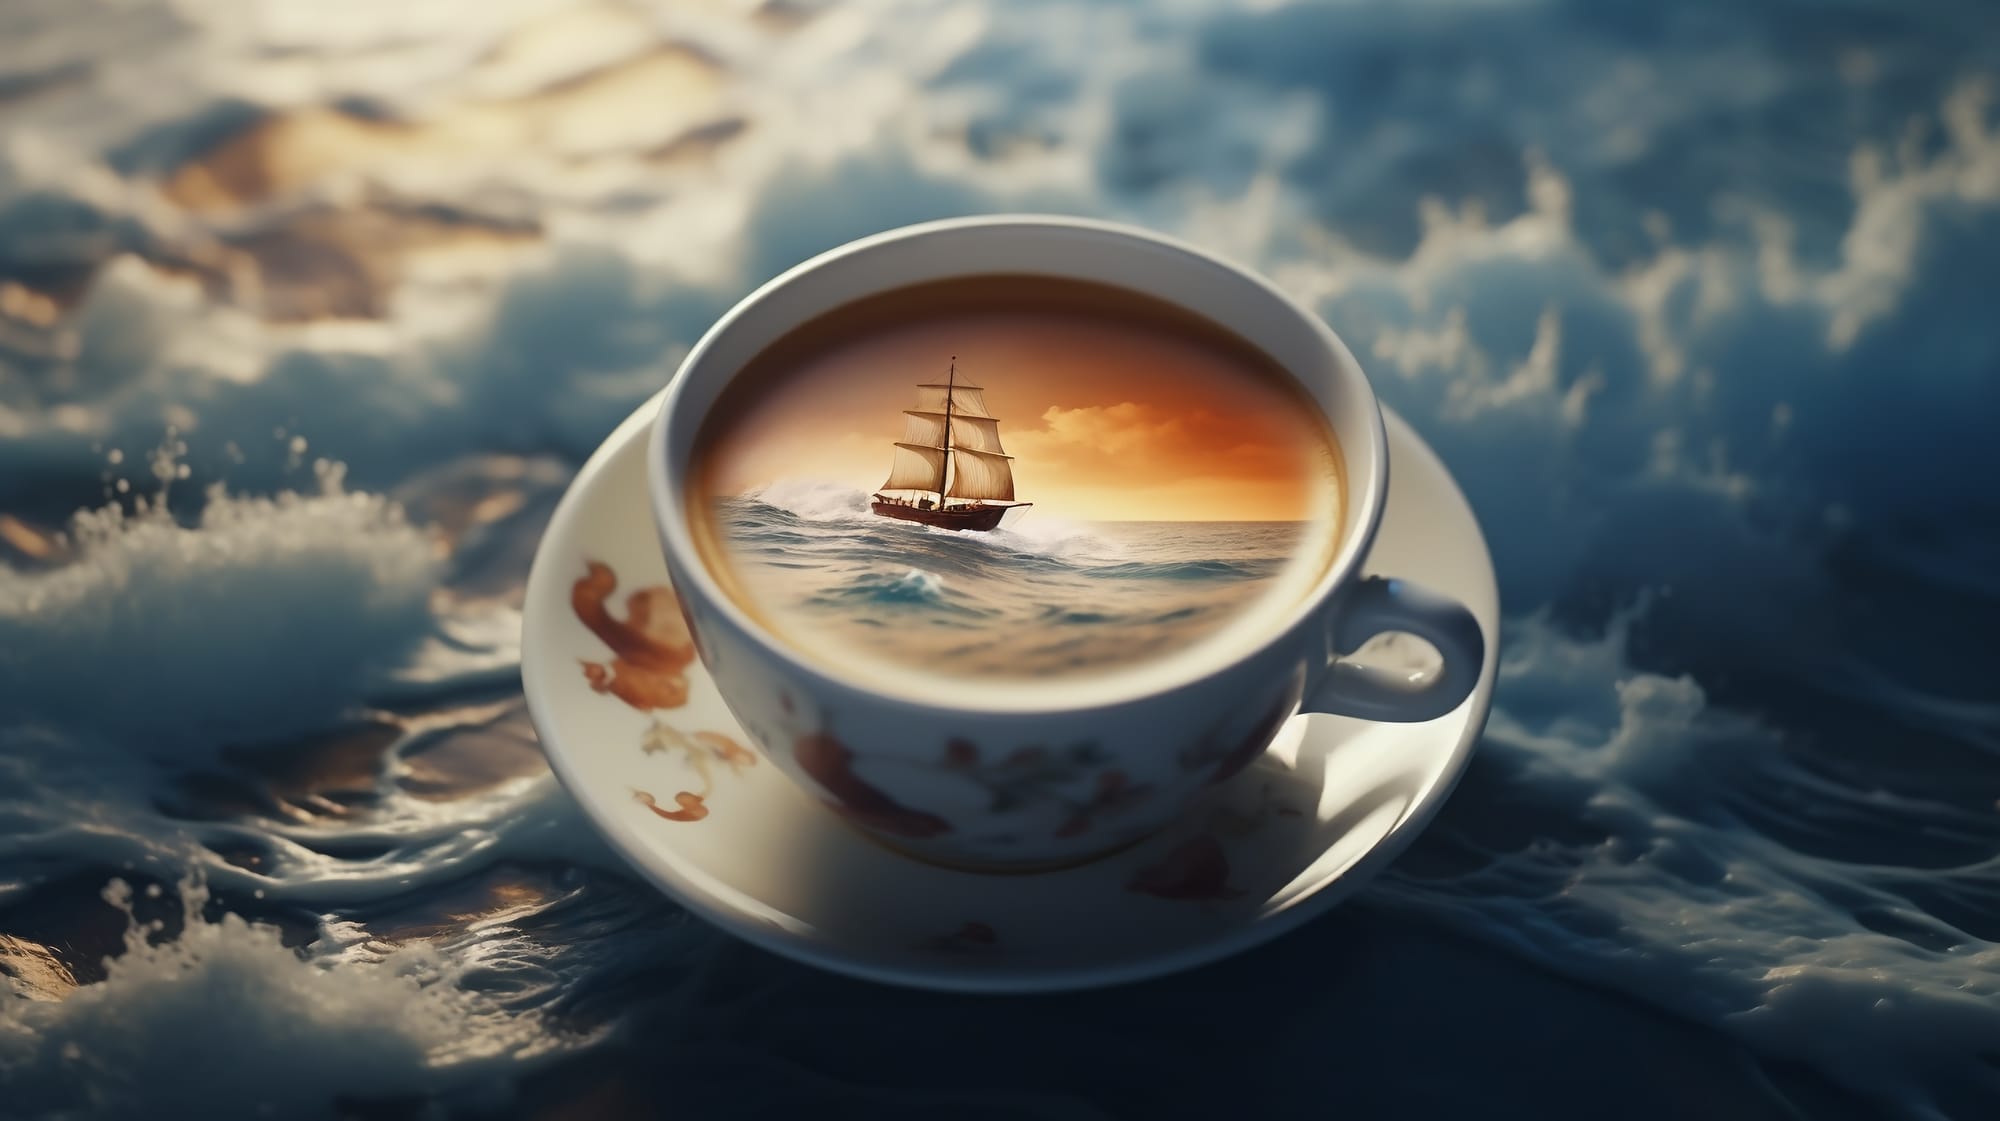 A Tempest in a Teacup